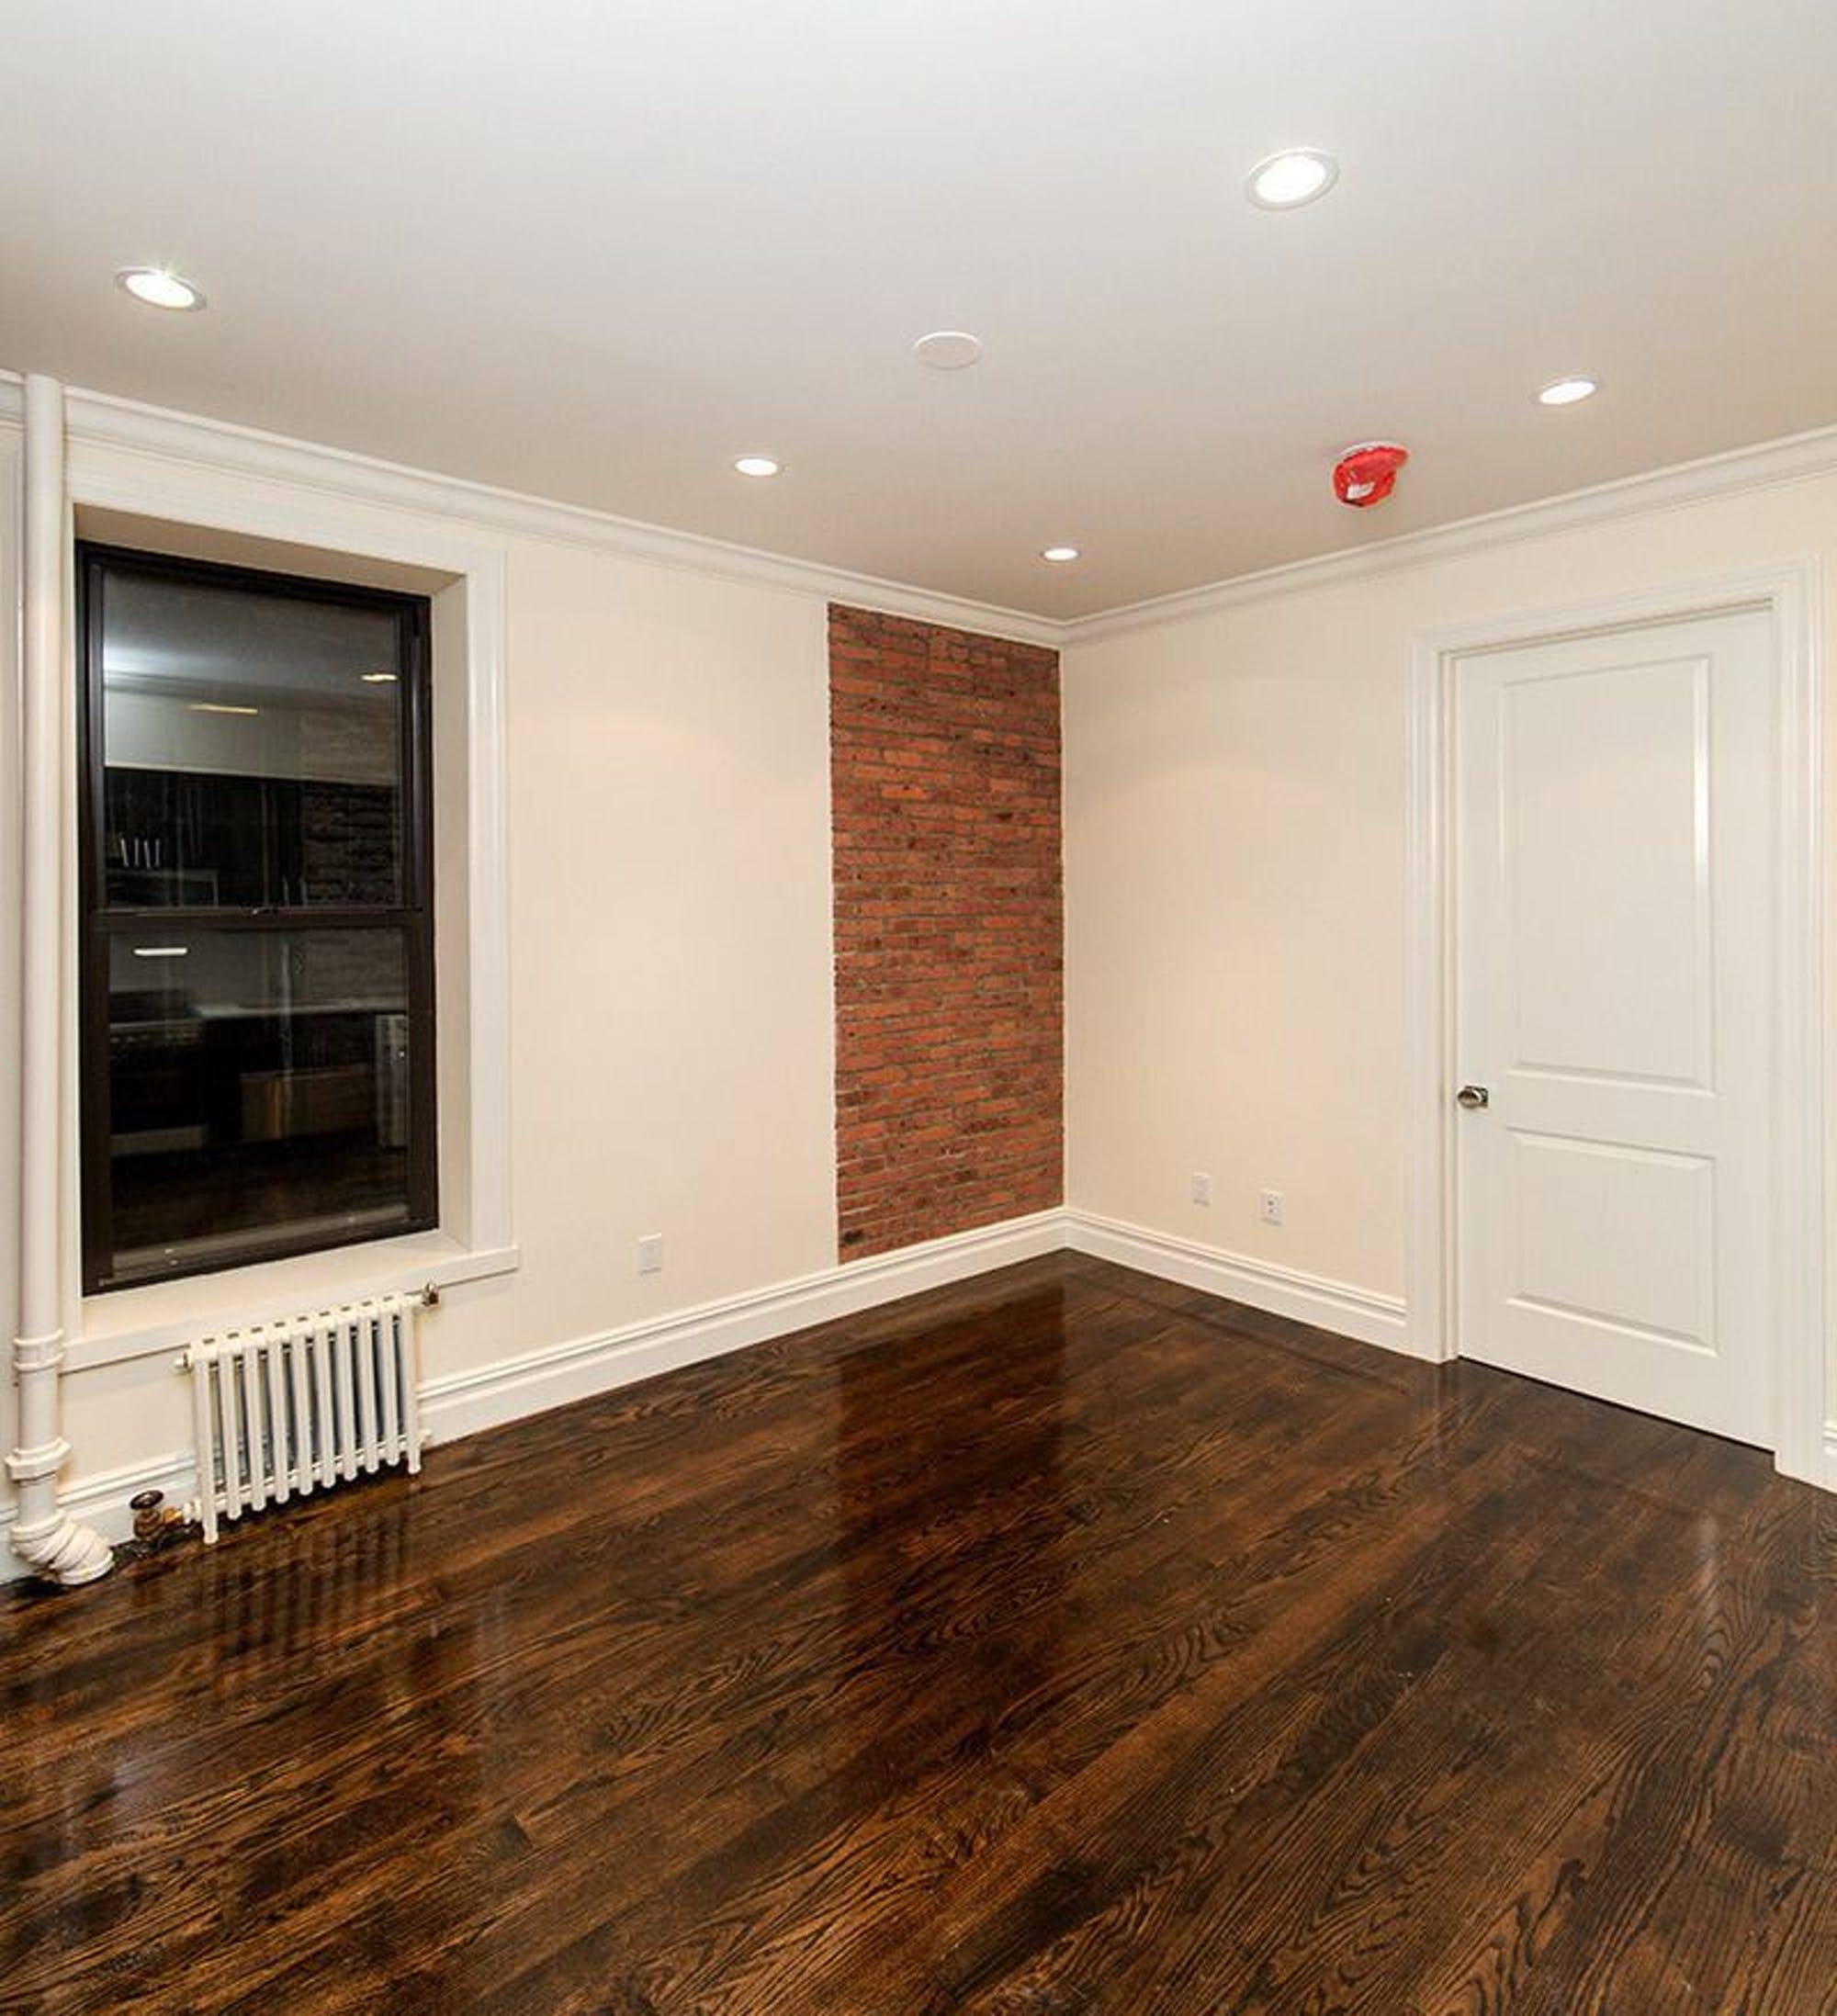 No Fee 1 Month Free Rent Come tour this beautifully renovated 3 bedroom department available for December 1st Apartment Features Exposed Brick Wide Plank Ebony Hardwood Flooring Chef's Kitchen w.